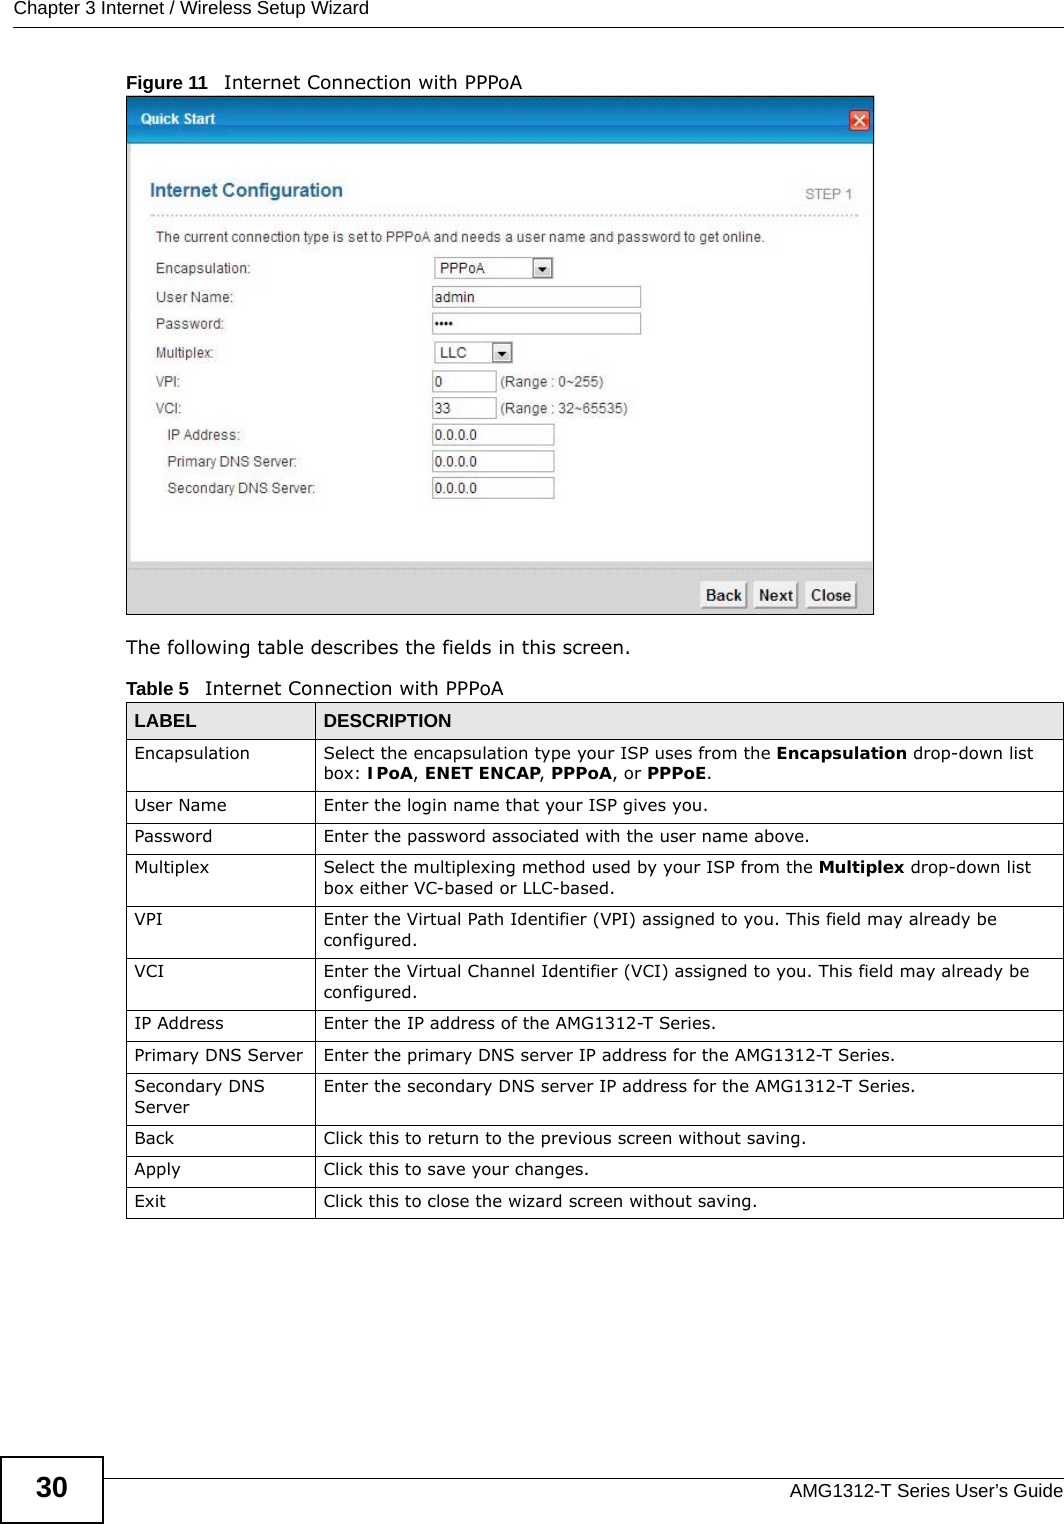 Chapter 3 Internet / Wireless Setup WizardAMG1312-T Series User’s Guide30Figure 11   Internet Connection with PPPoAThe following table describes the fields in this screen.Table 5   Internet Connection with PPPoALABEL DESCRIPTIONEncapsulation Select the encapsulation type your ISP uses from the Encapsulation drop-down list box: IPoA, ENET ENCAP, PPPoA, or PPPoE.User Name Enter the login name that your ISP gives you. Password Enter the password associated with the user name above.Multiplex Select the multiplexing method used by your ISP from the Multiplex drop-down list box either VC-based or LLC-based. VPI Enter the Virtual Path Identifier (VPI) assigned to you. This field may already be configured.VCI Enter the Virtual Channel Identifier (VCI) assigned to you. This field may already be configured.IP Address Enter the IP address of the AMG1312-T Series. Primary DNS Server Enter the primary DNS server IP address for the AMG1312-T Series.Secondary DNS ServerEnter the secondary DNS server IP address for the AMG1312-T Series.Back Click this to return to the previous screen without saving.Apply Click this to save your changes.Exit Click this to close the wizard screen without saving.